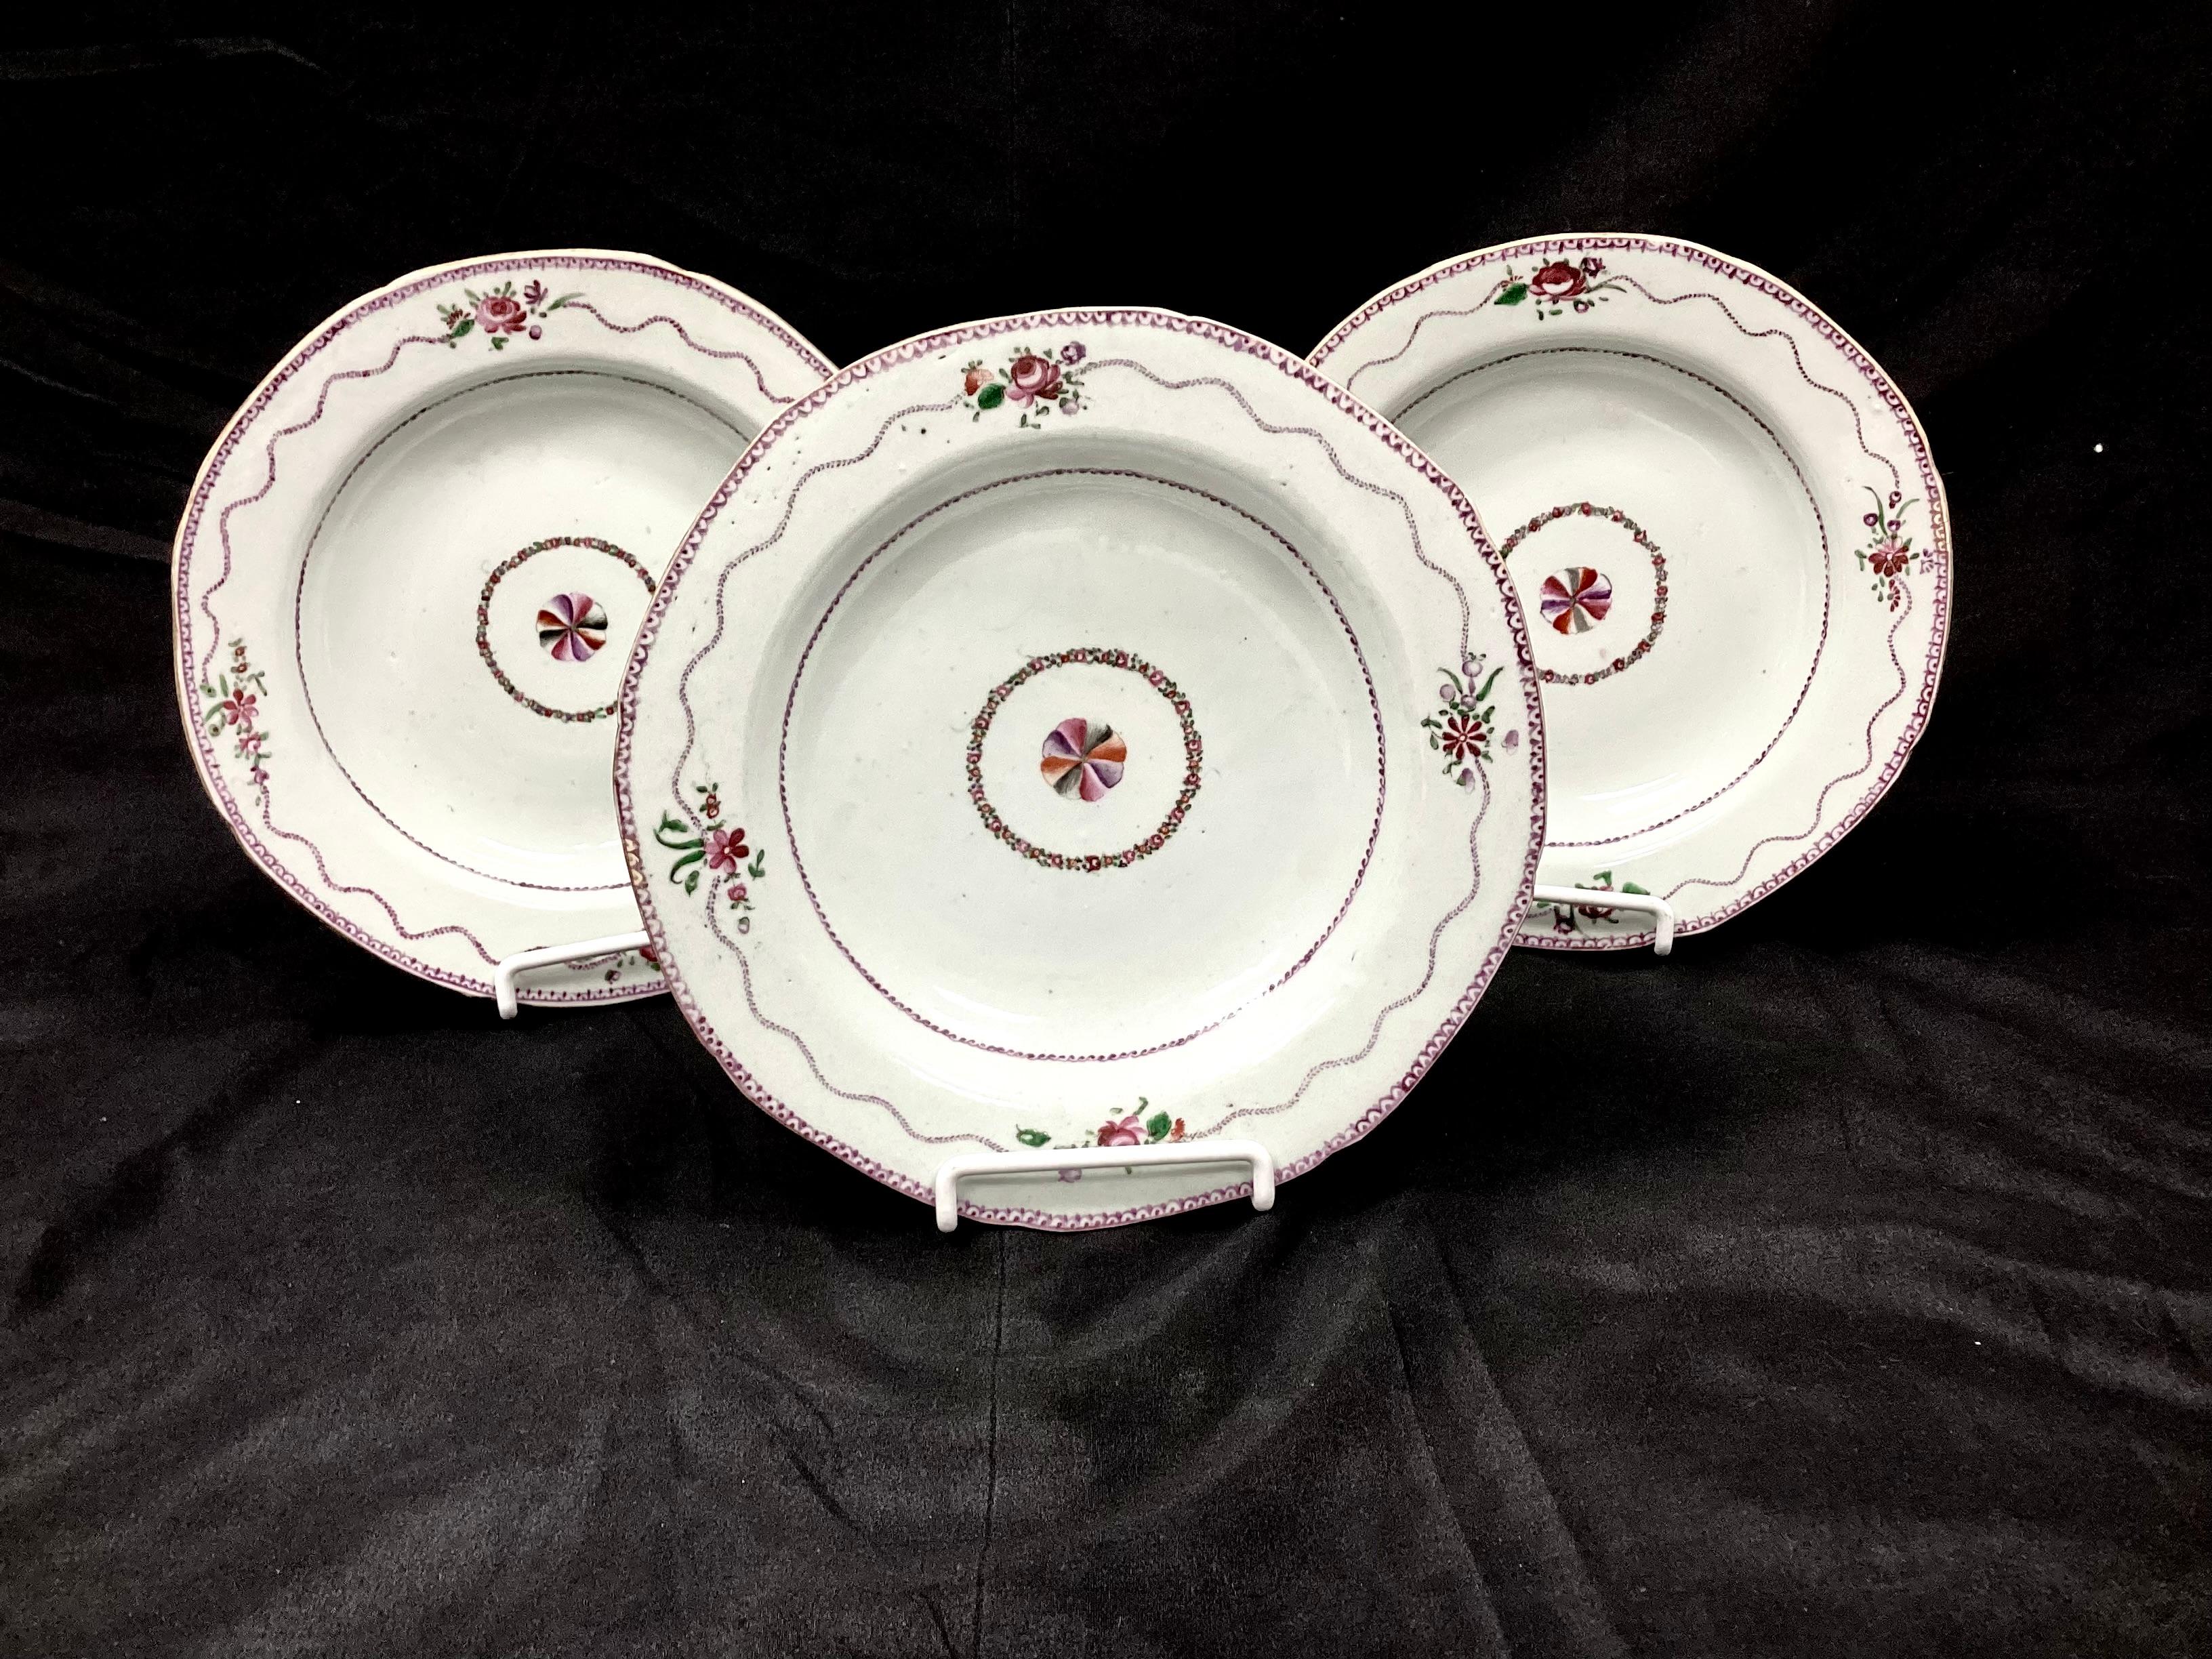 Set of six 19th century Chinese Export porcelain bowls. Bowls are hand-painted with florals with central flower surrounded by garland. Features purple, green and white colors. 